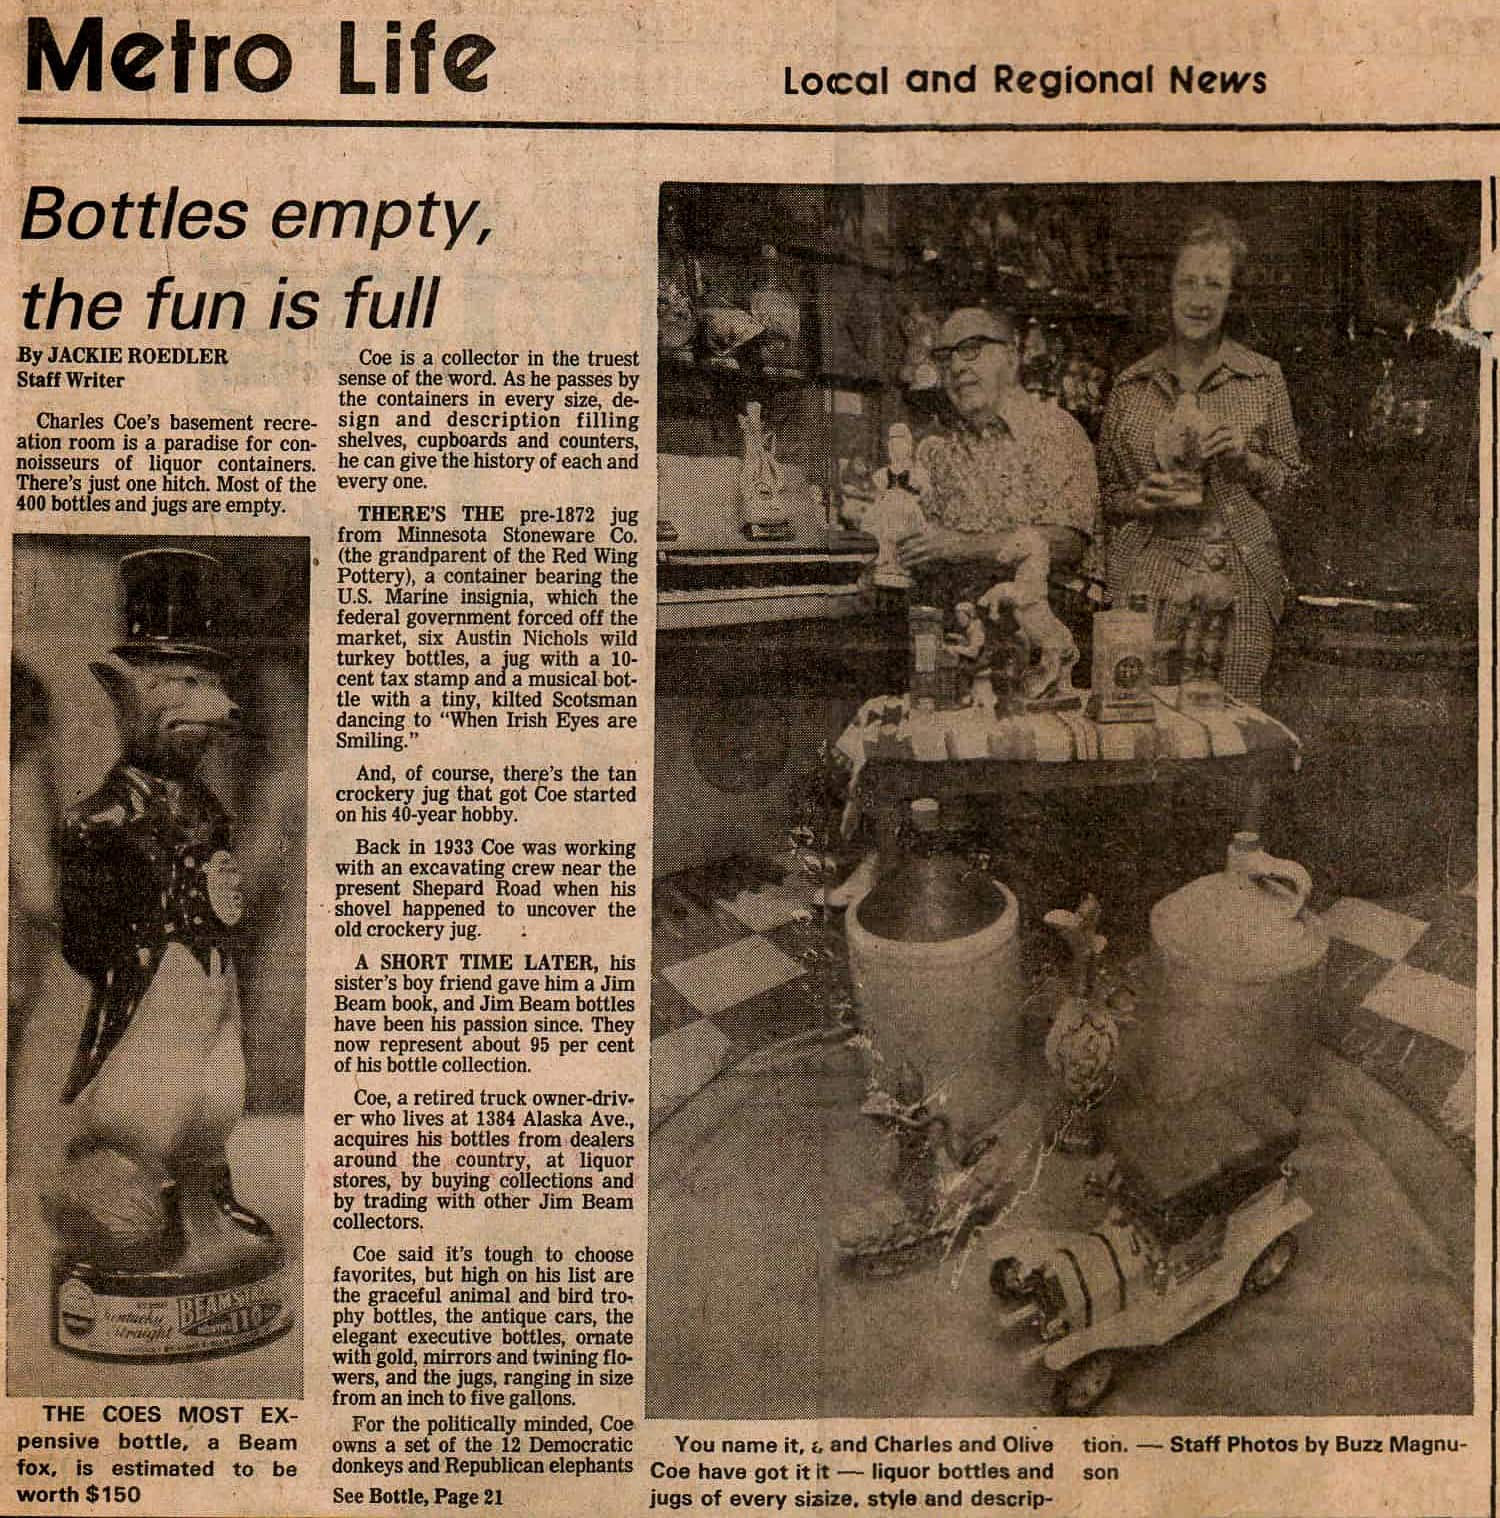 Charlie and Ollie in the Metro Life section of the old St. Paul Dispatch on June 20, 1977.